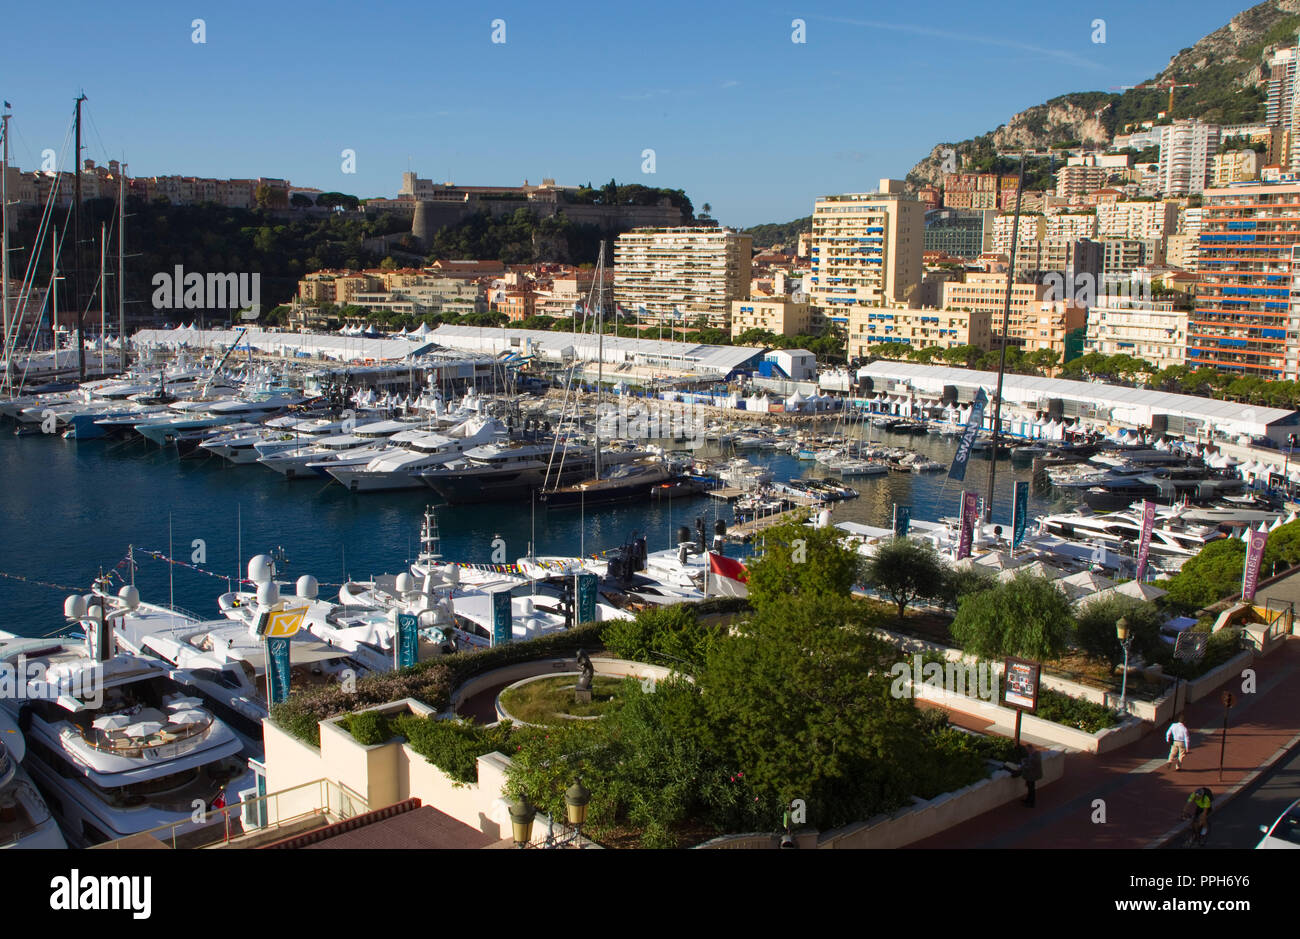 Monte Carlo, Monaco - September 26, 2018: Monaco Yacht Show Atmosphere. Yachts, Yachten, Boot, Boote, Ship, Ships, Superyacht, Superyachts, Sea, Meer, Mare, | usage worldwide Stock Photo